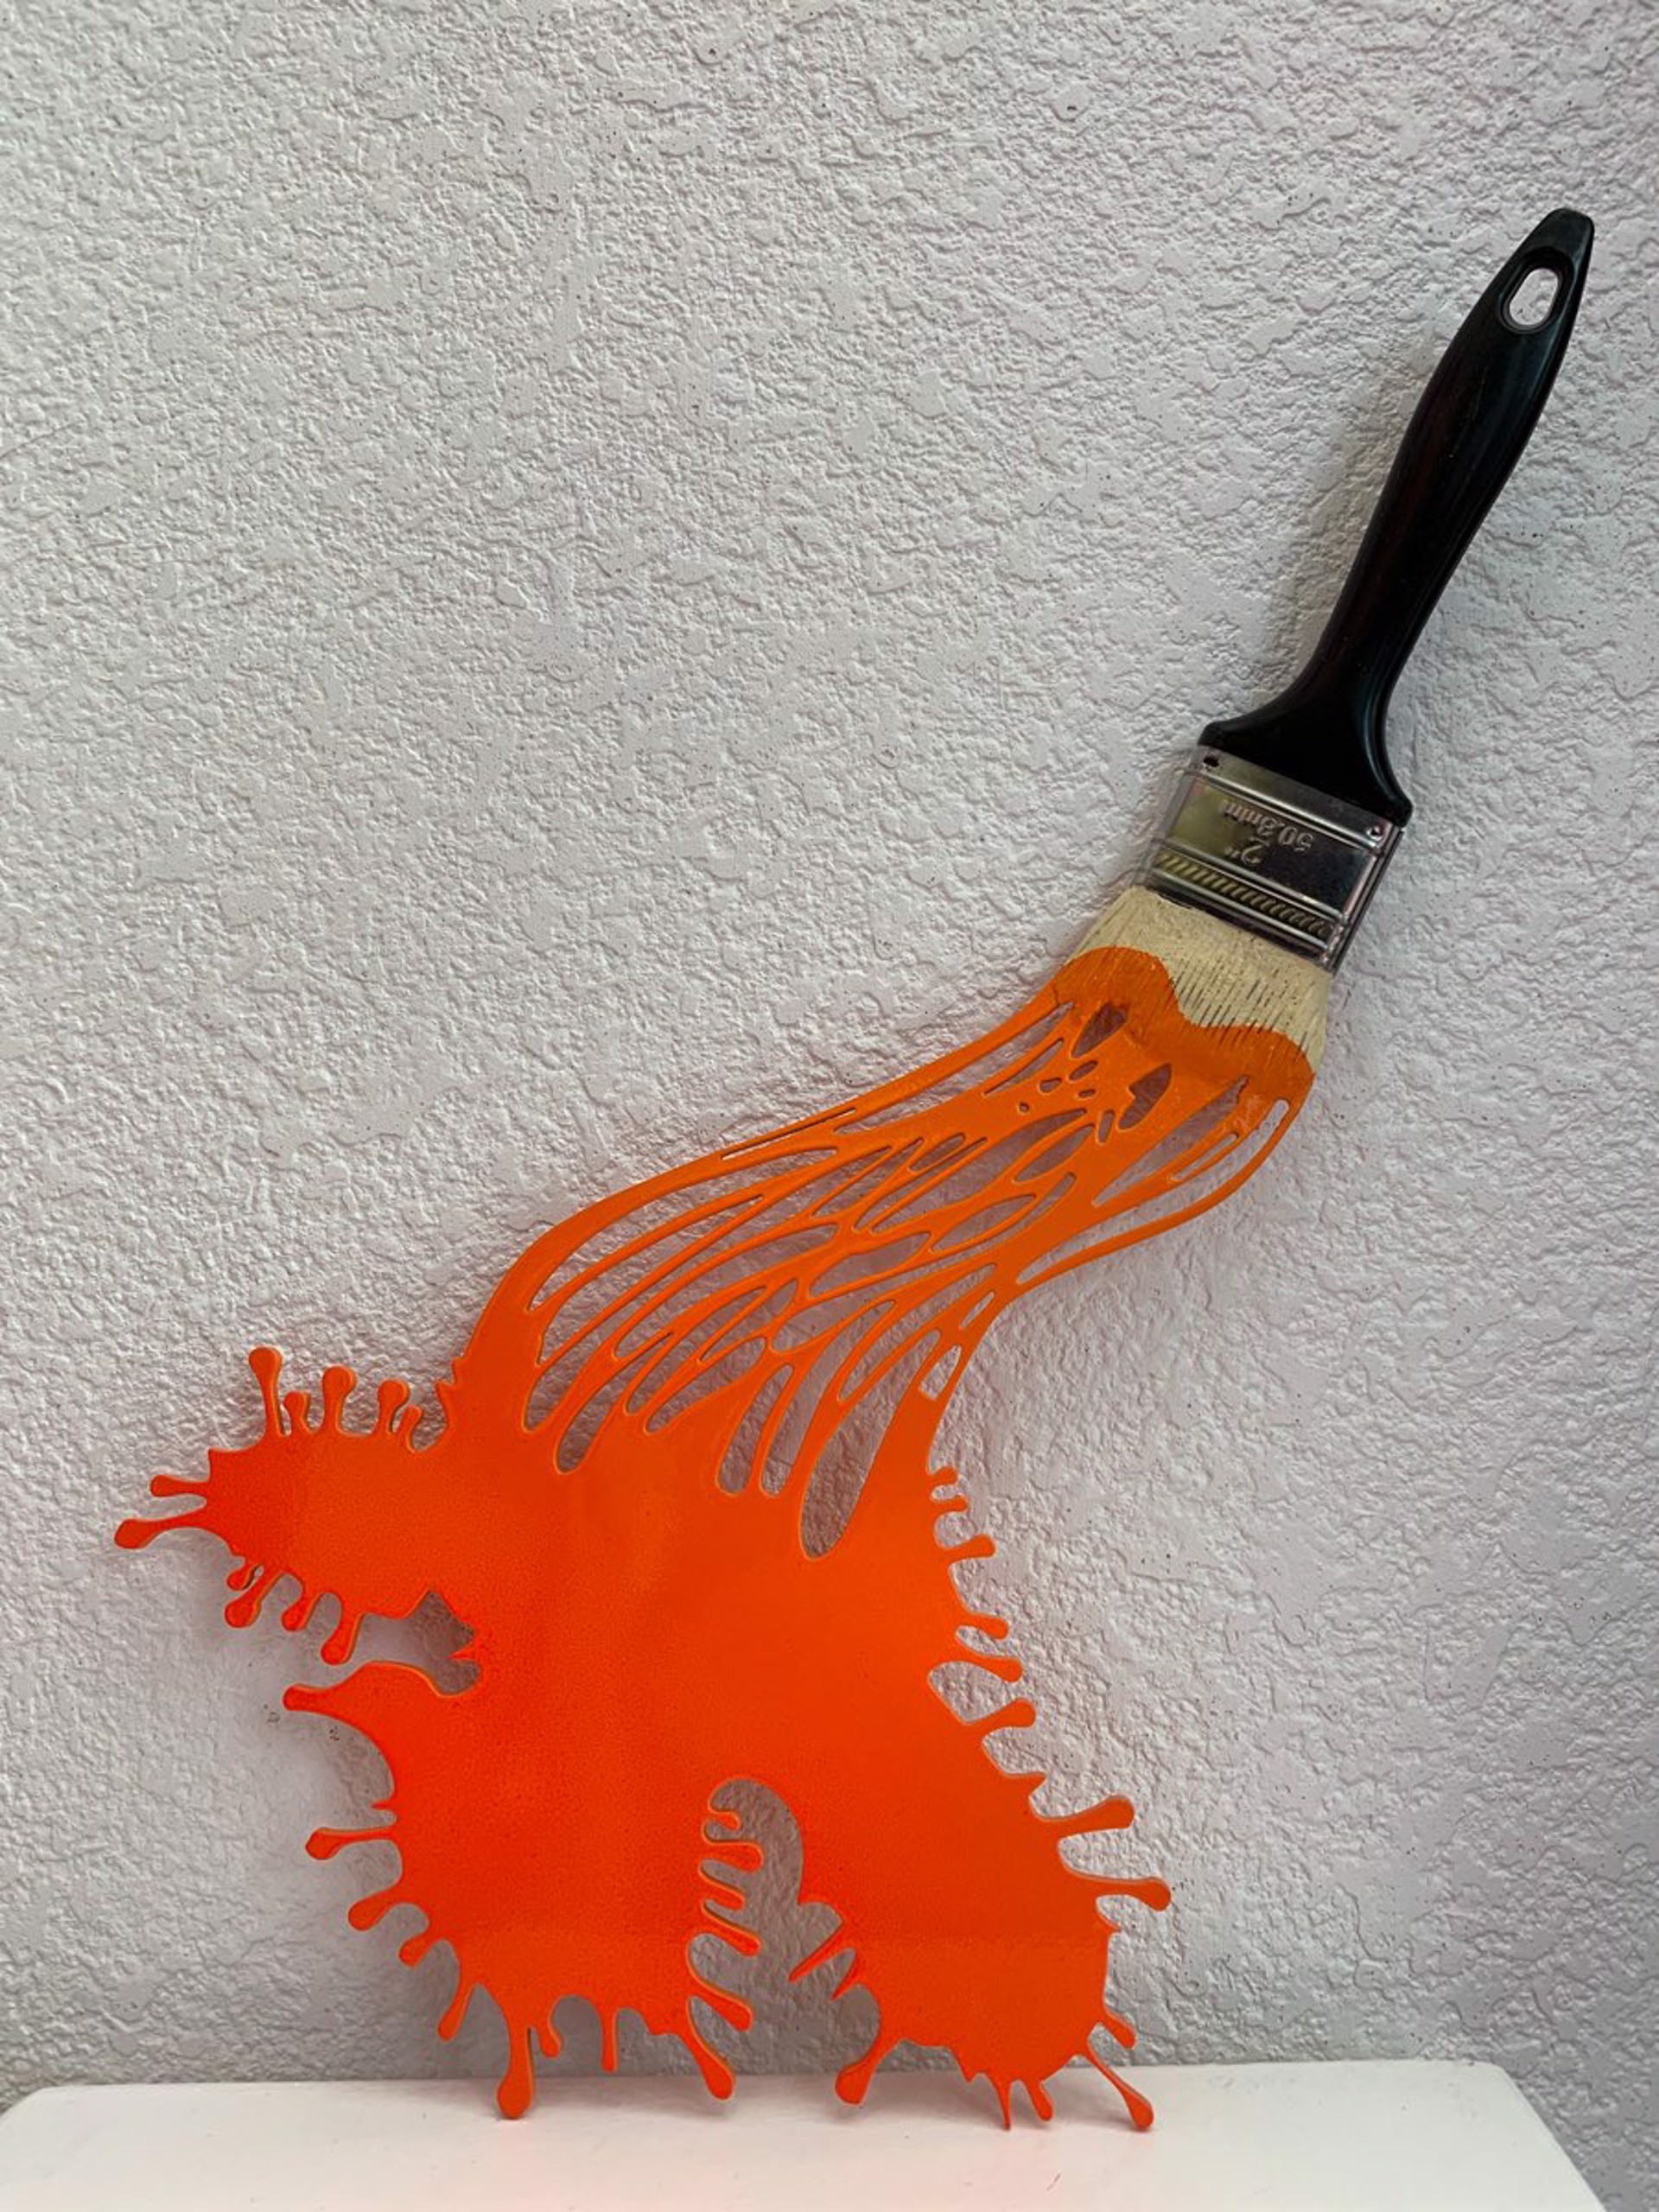 Orange Metal Small Brush  by Brushes and Rollers "Let's Paint" by Efi Mashiah